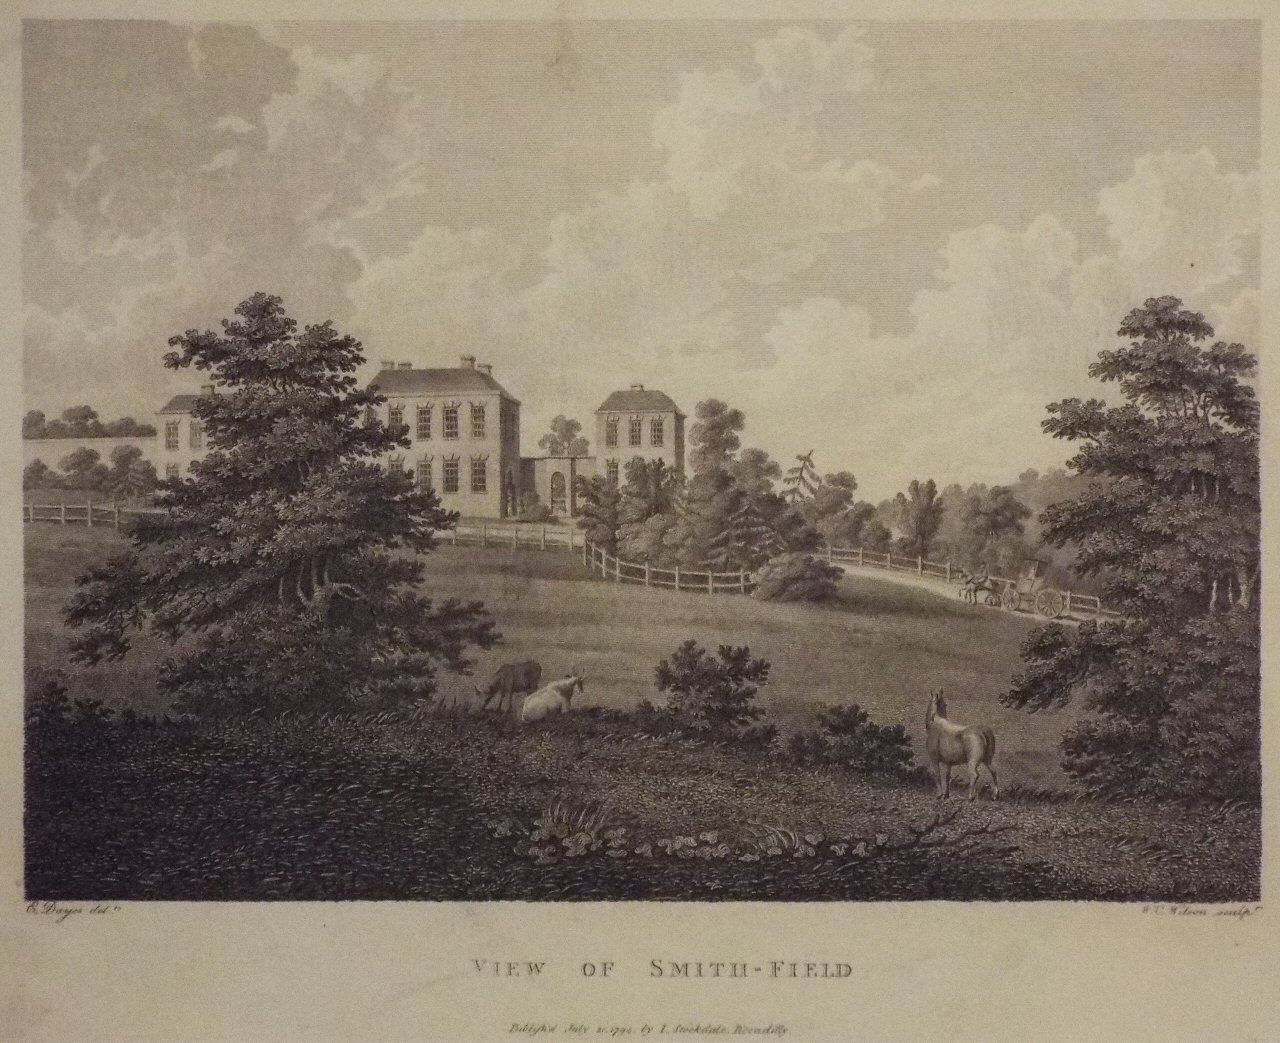 Print - View of Smith-Field - Wilson